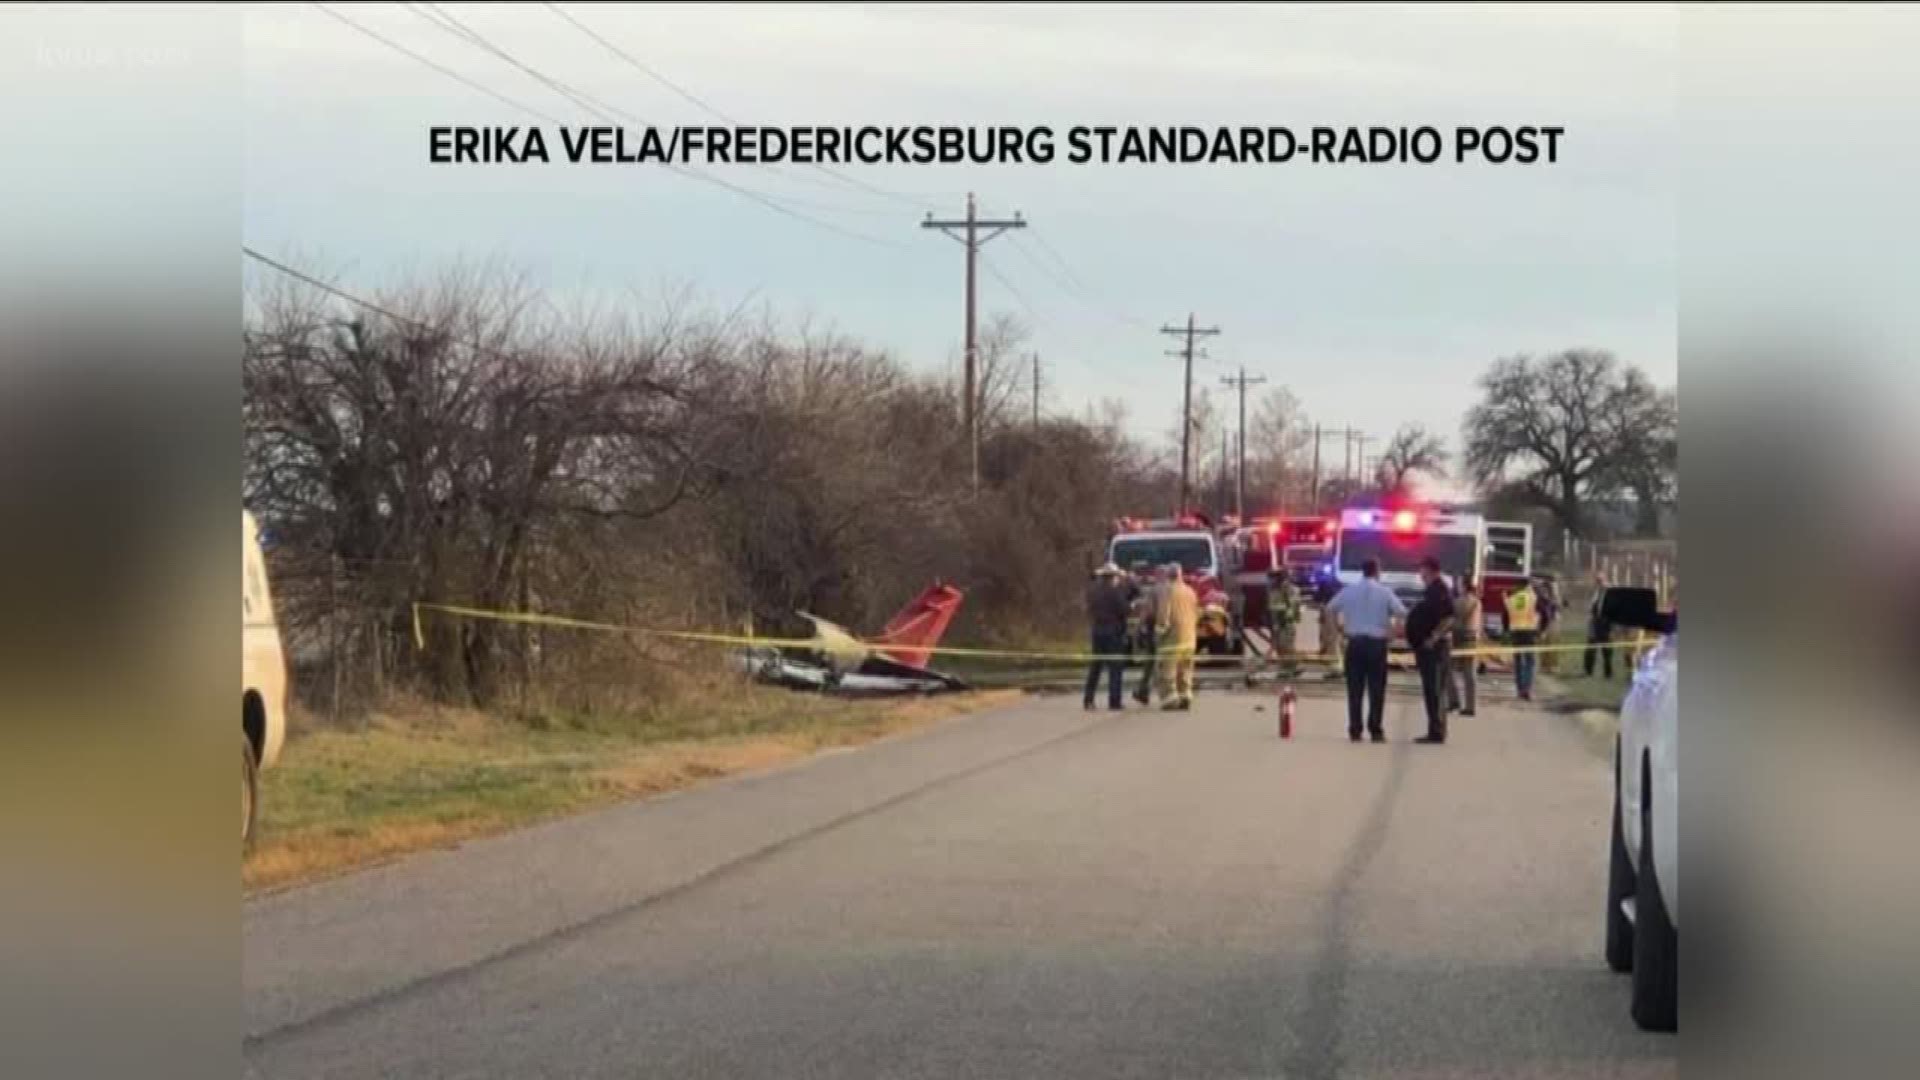 The pilot of a single-engine plane died after crashing Thursday afternoon in an area just outside Fredericksburg, Department of Public Safety officials said.